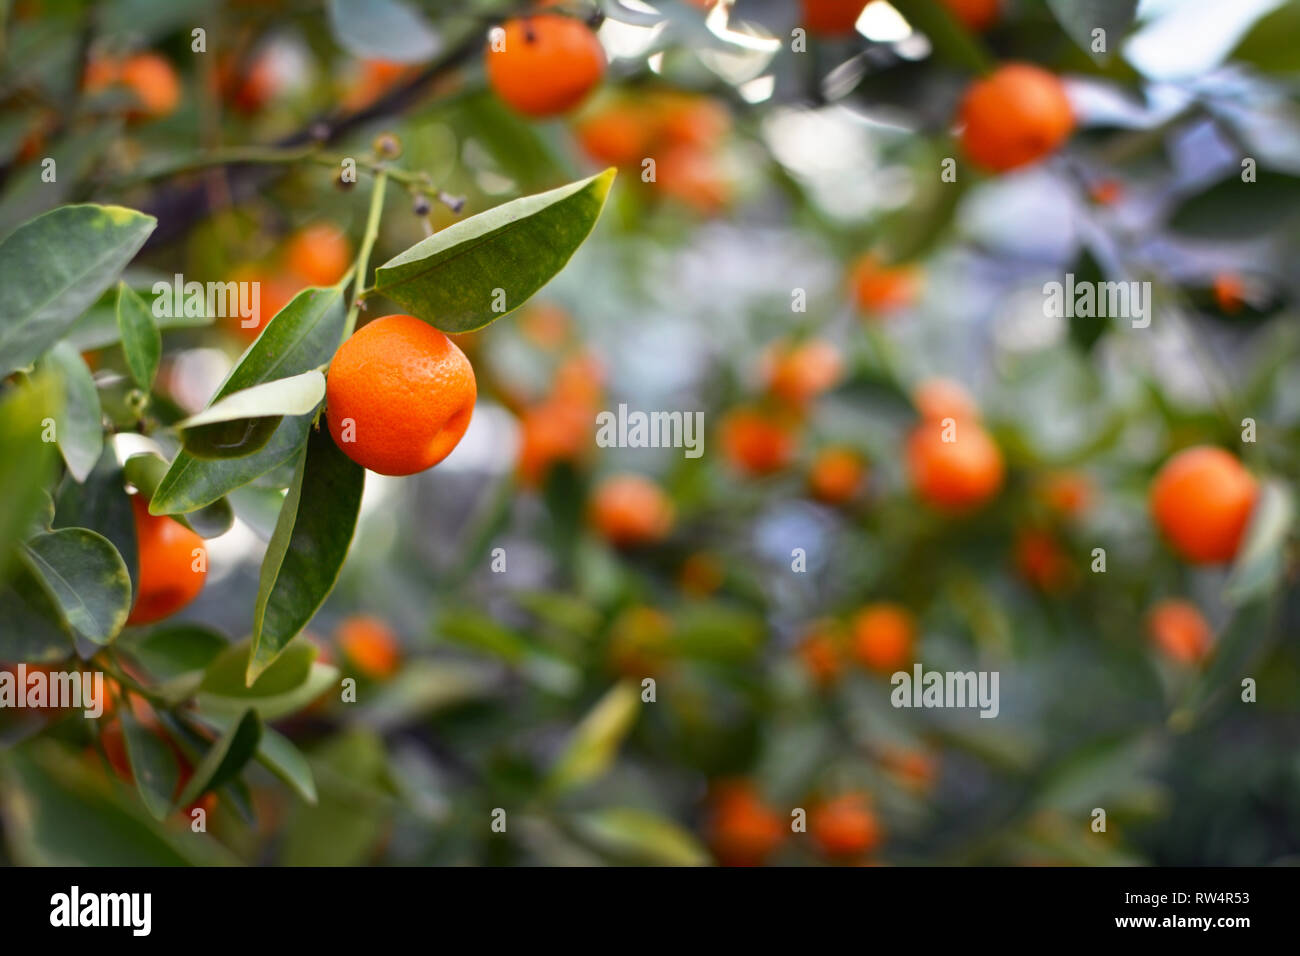 Close up of a Calamondin Citrofortunella Macrocarpa Citrus tree orange with blurry fruits and leaves in the background Stock Photo